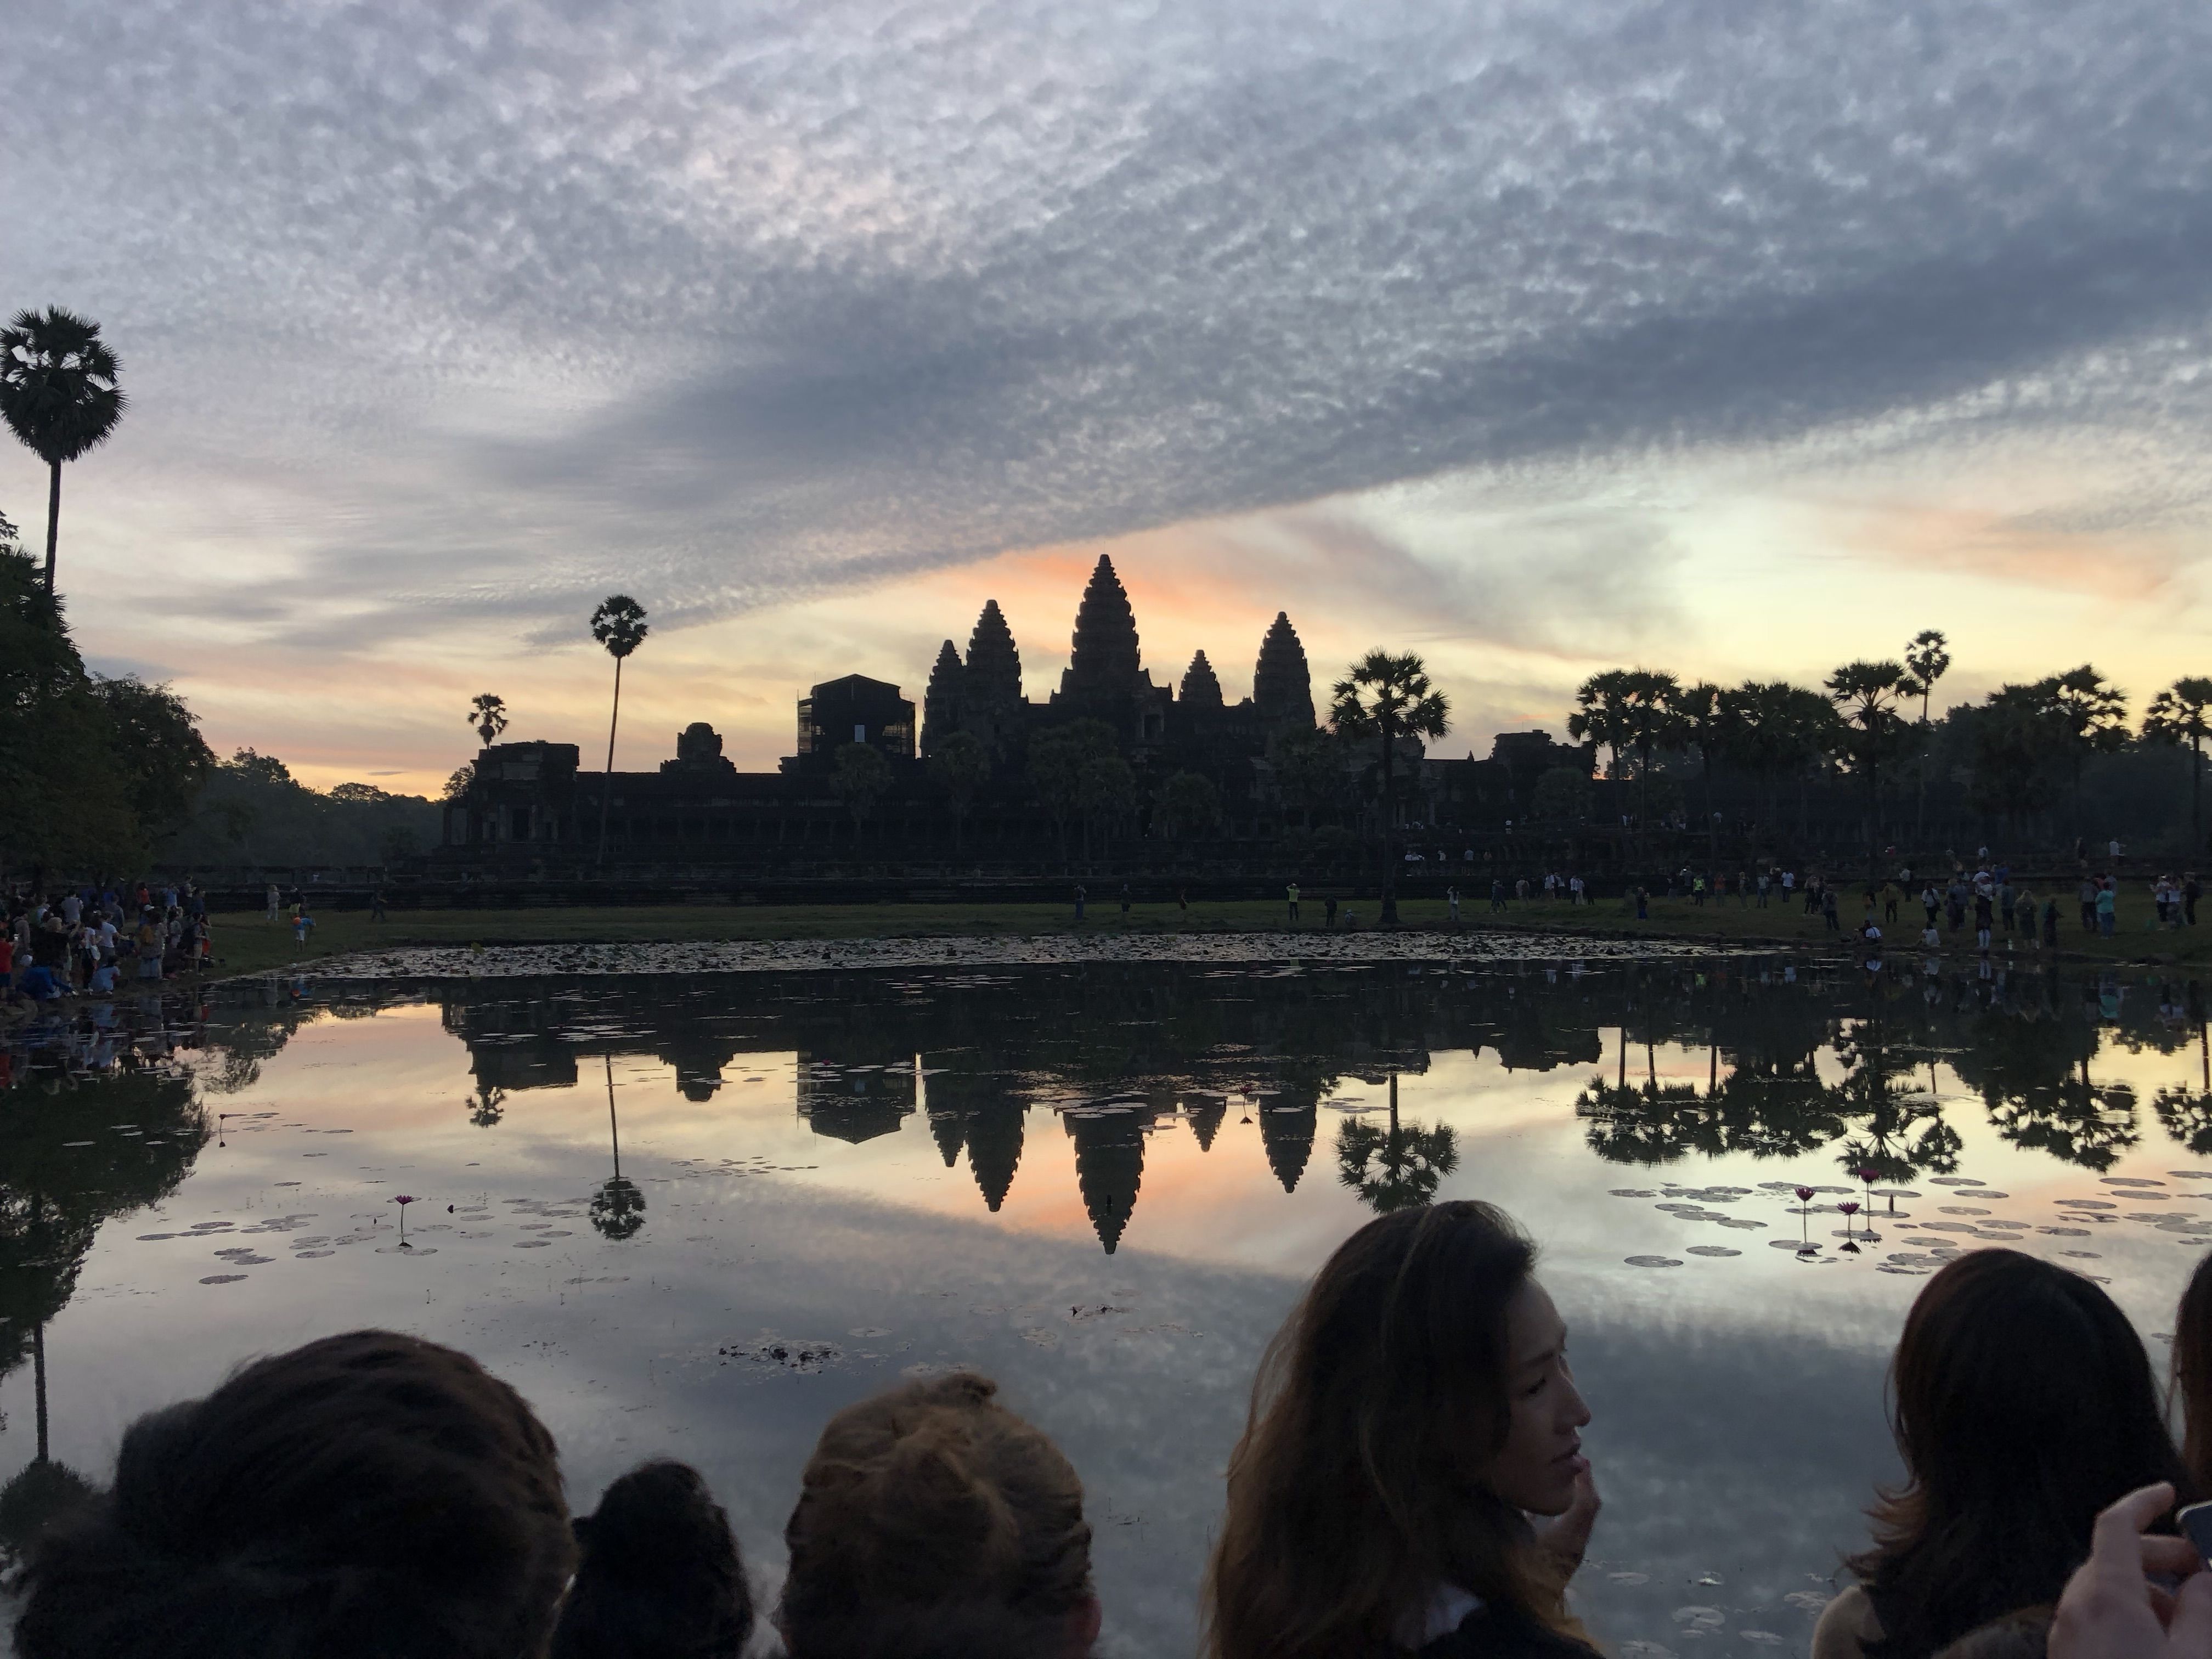 The massive stone temple of Angkor Wat silhouetted against the sunrise and reflected in a vast pool of water in front of it. At the bottom of the photo are the heads of tourists looking at the sight.